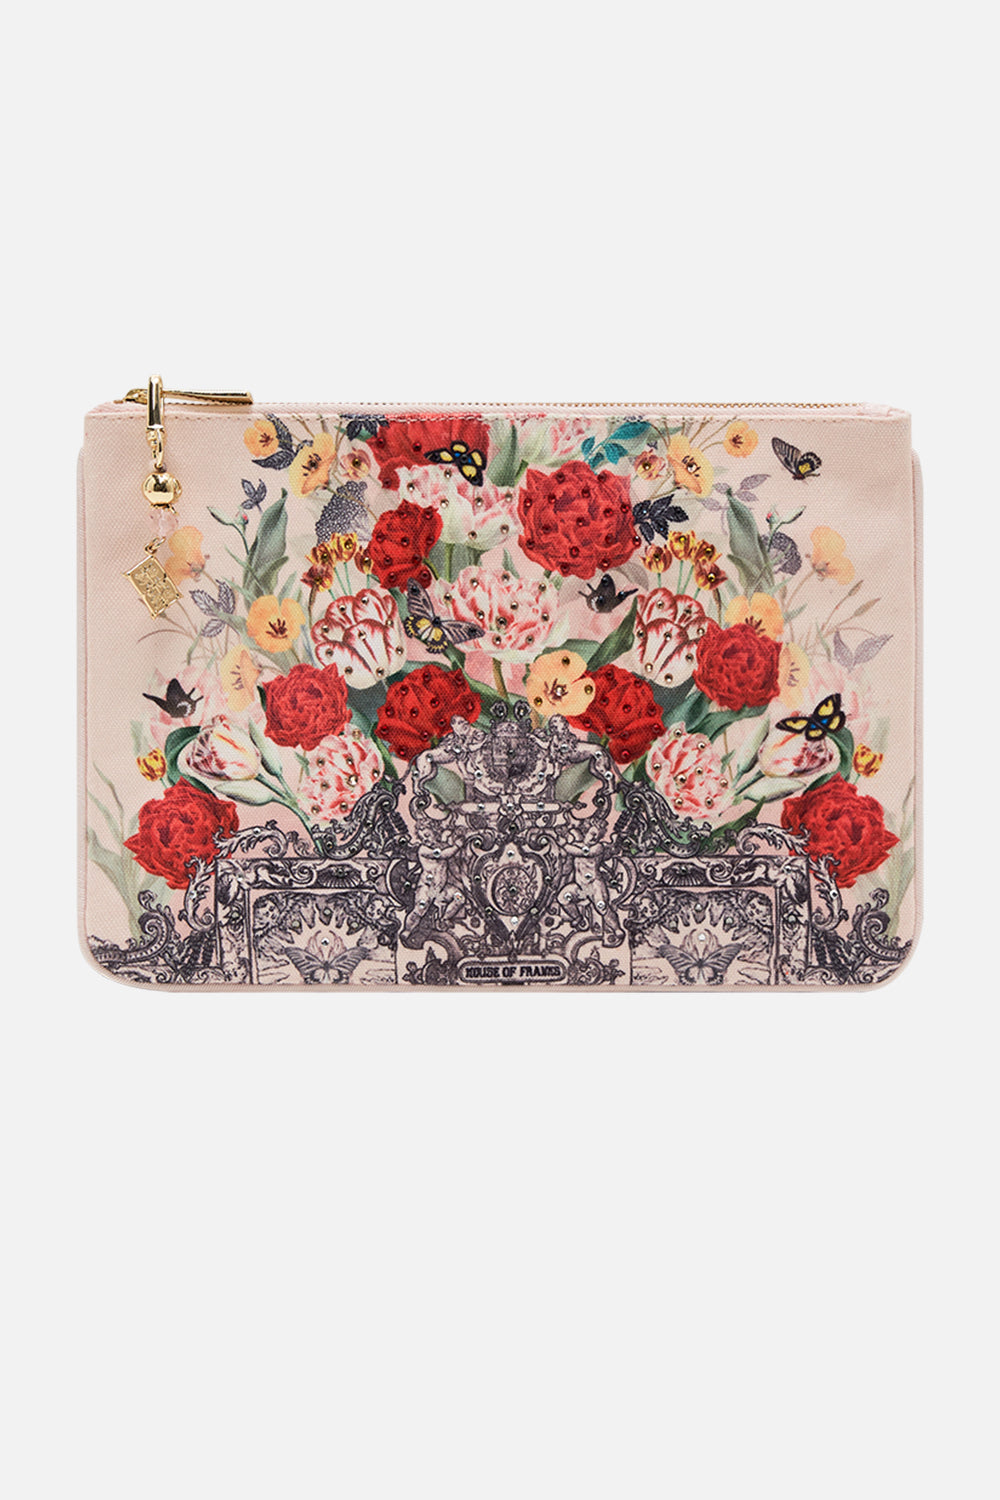 CAMILLA floral print clutch bag in Etched Into Eternity print